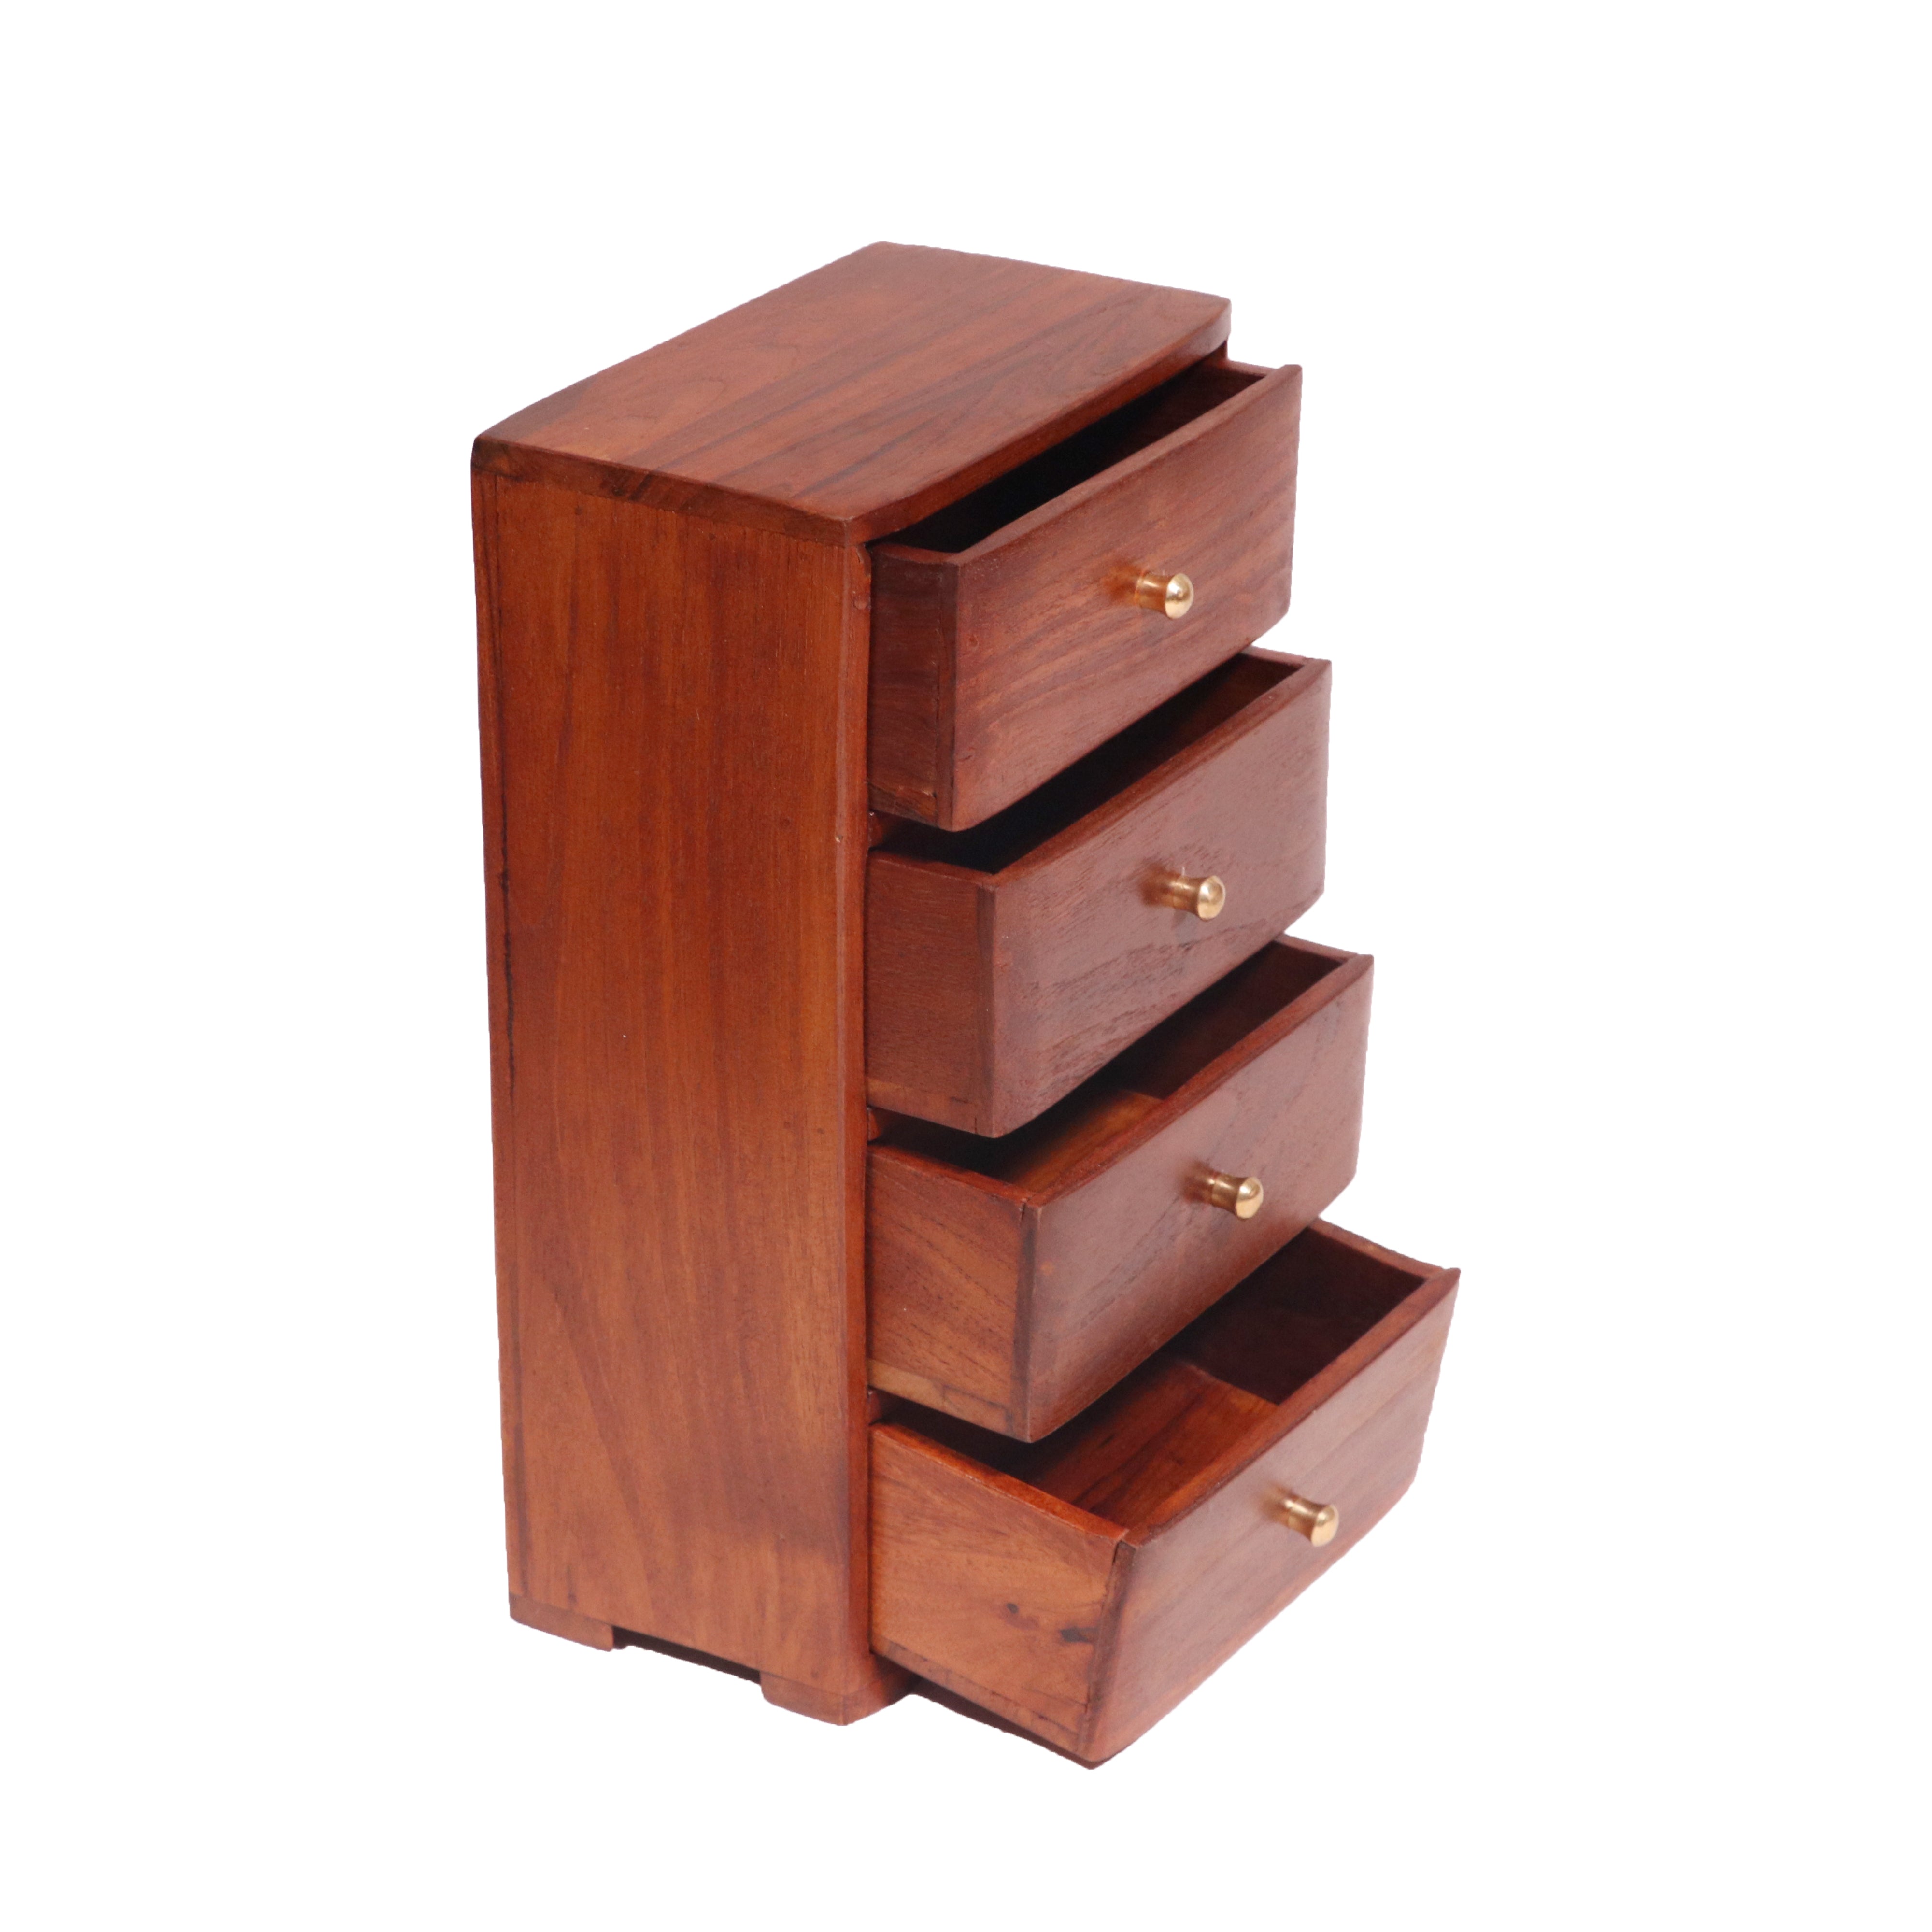 Four Compartment Miniature Chests Of Drawers (Natural Touch) Desk Organizer